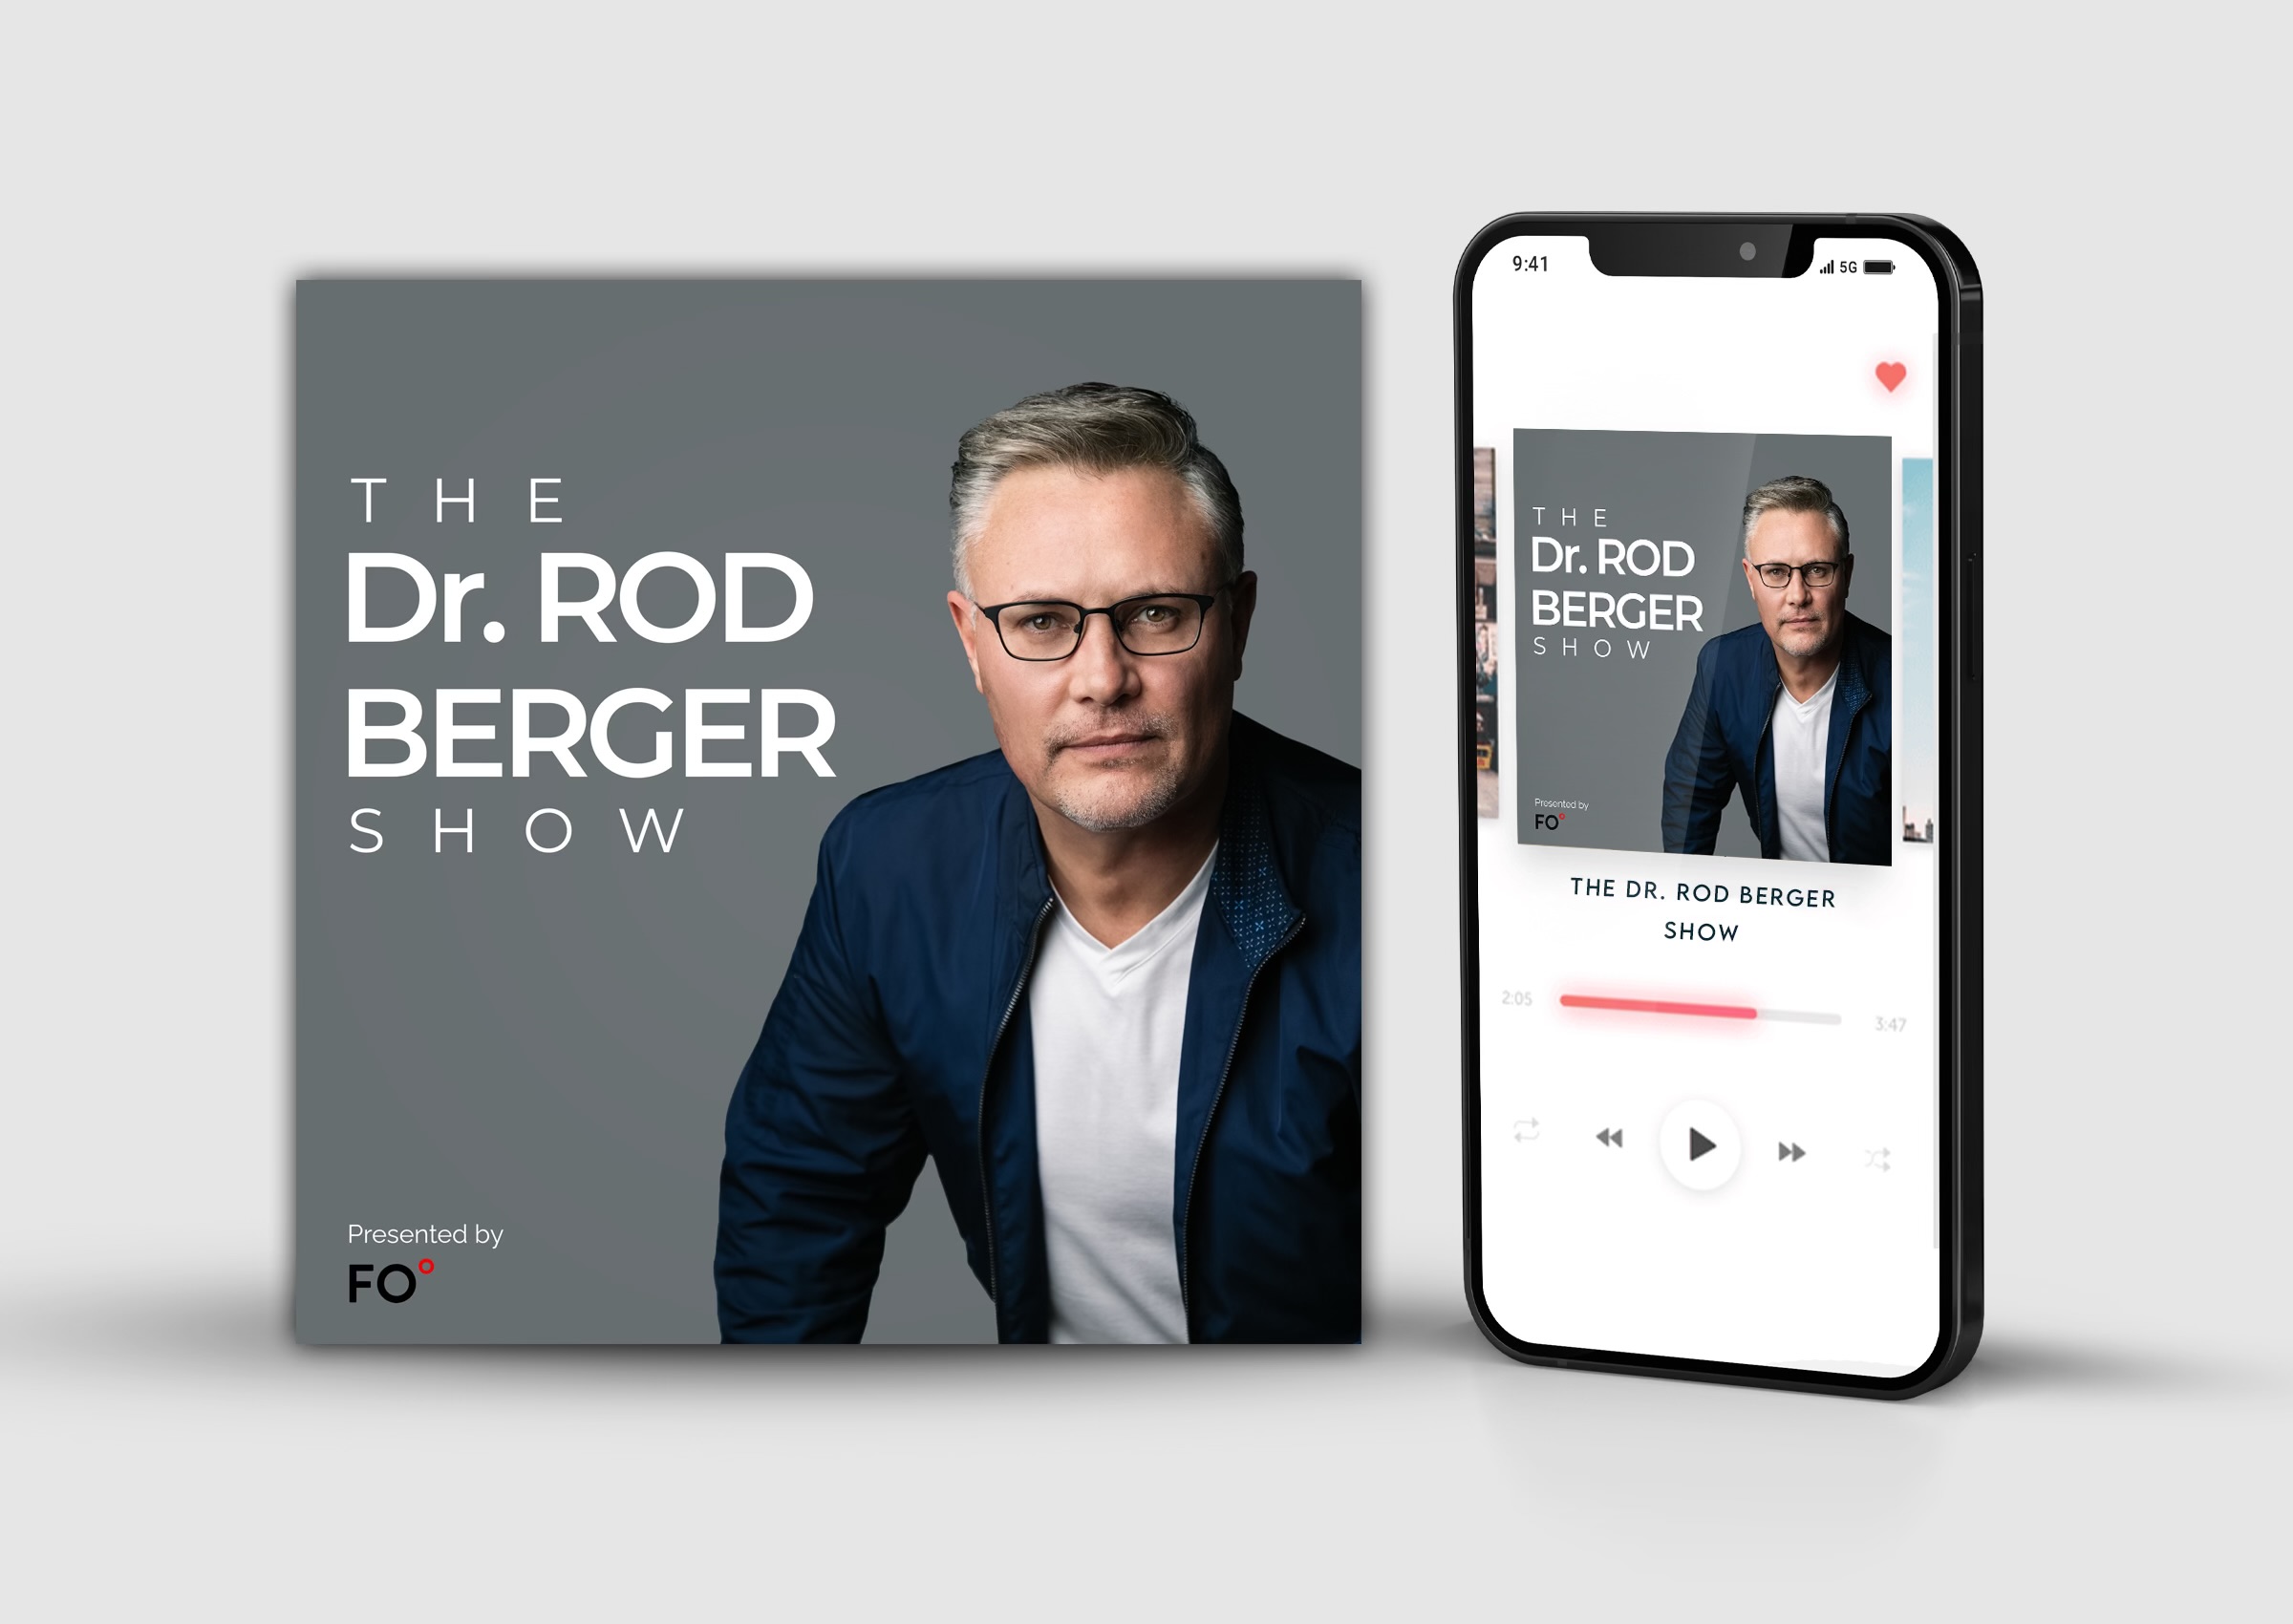 The Dr Rod Berger Show presented by Fair Observer